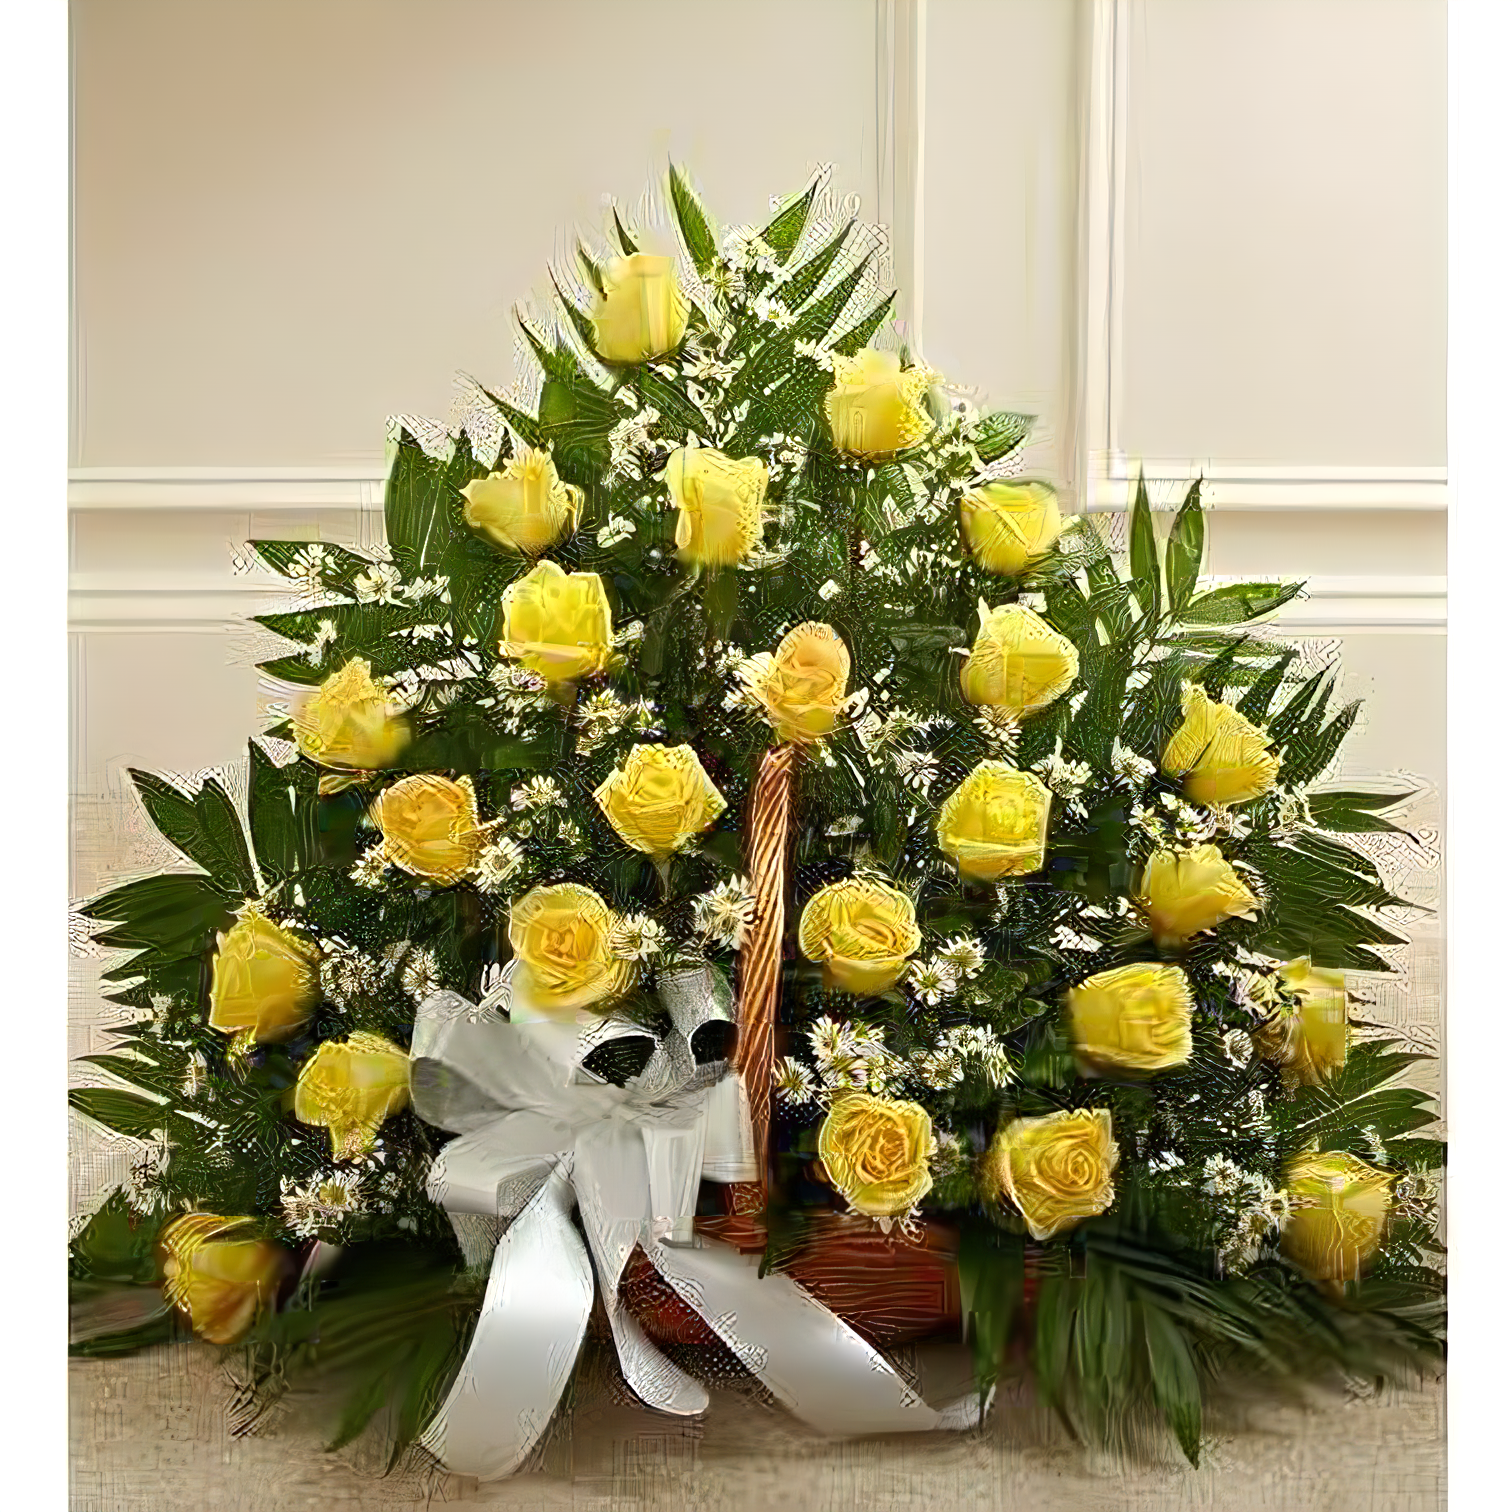 Sincerest Sympathies Fireside Basket - Yellow - Funeral > For the Service